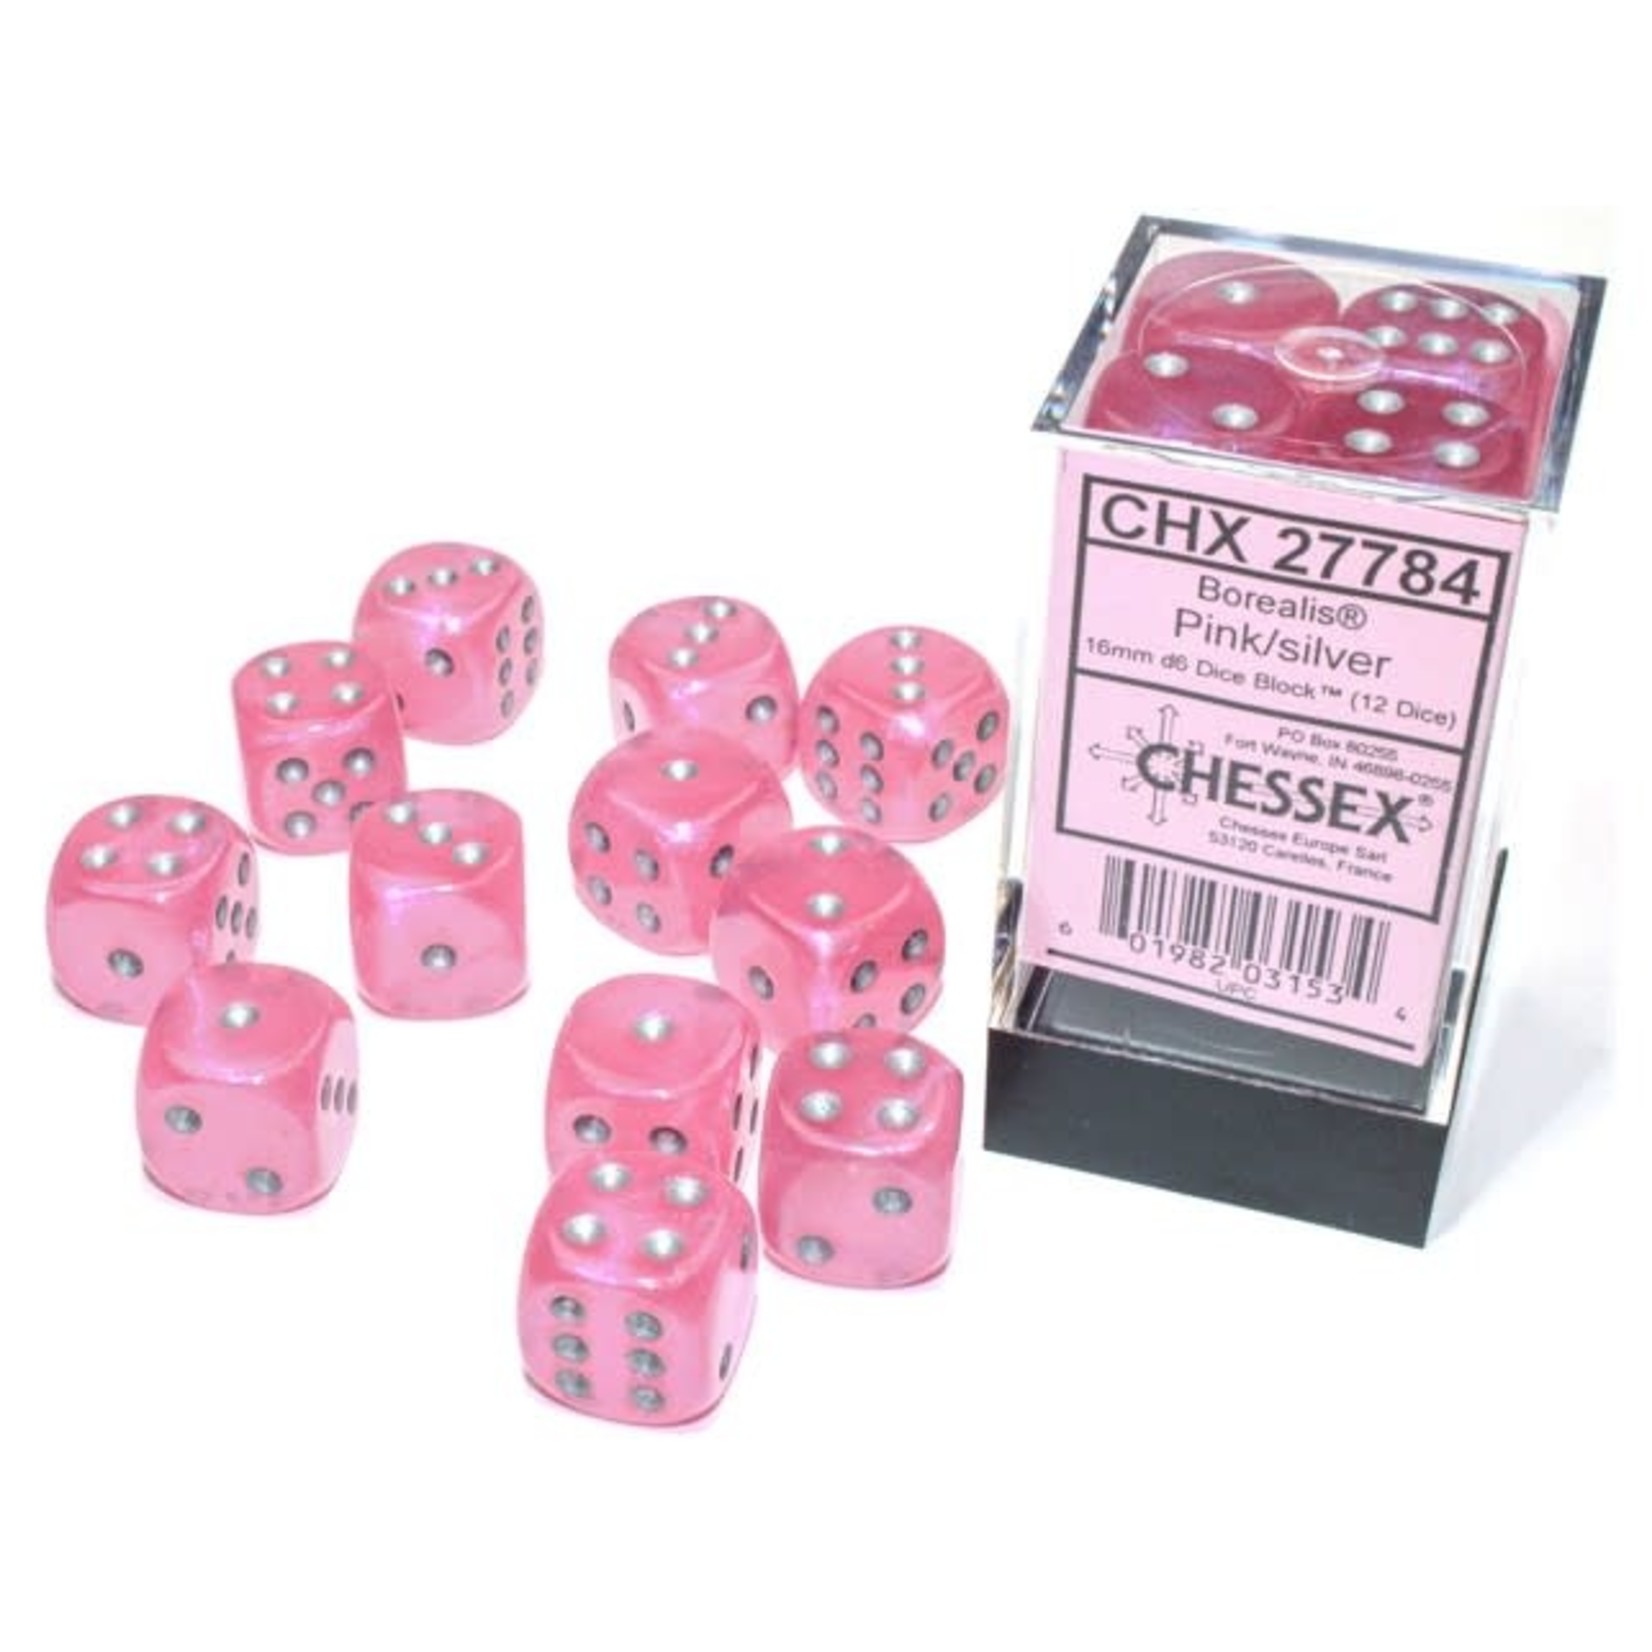 Chessex Chessex Borealis Pink with Silver Luminary 16 mm d6 12 die set